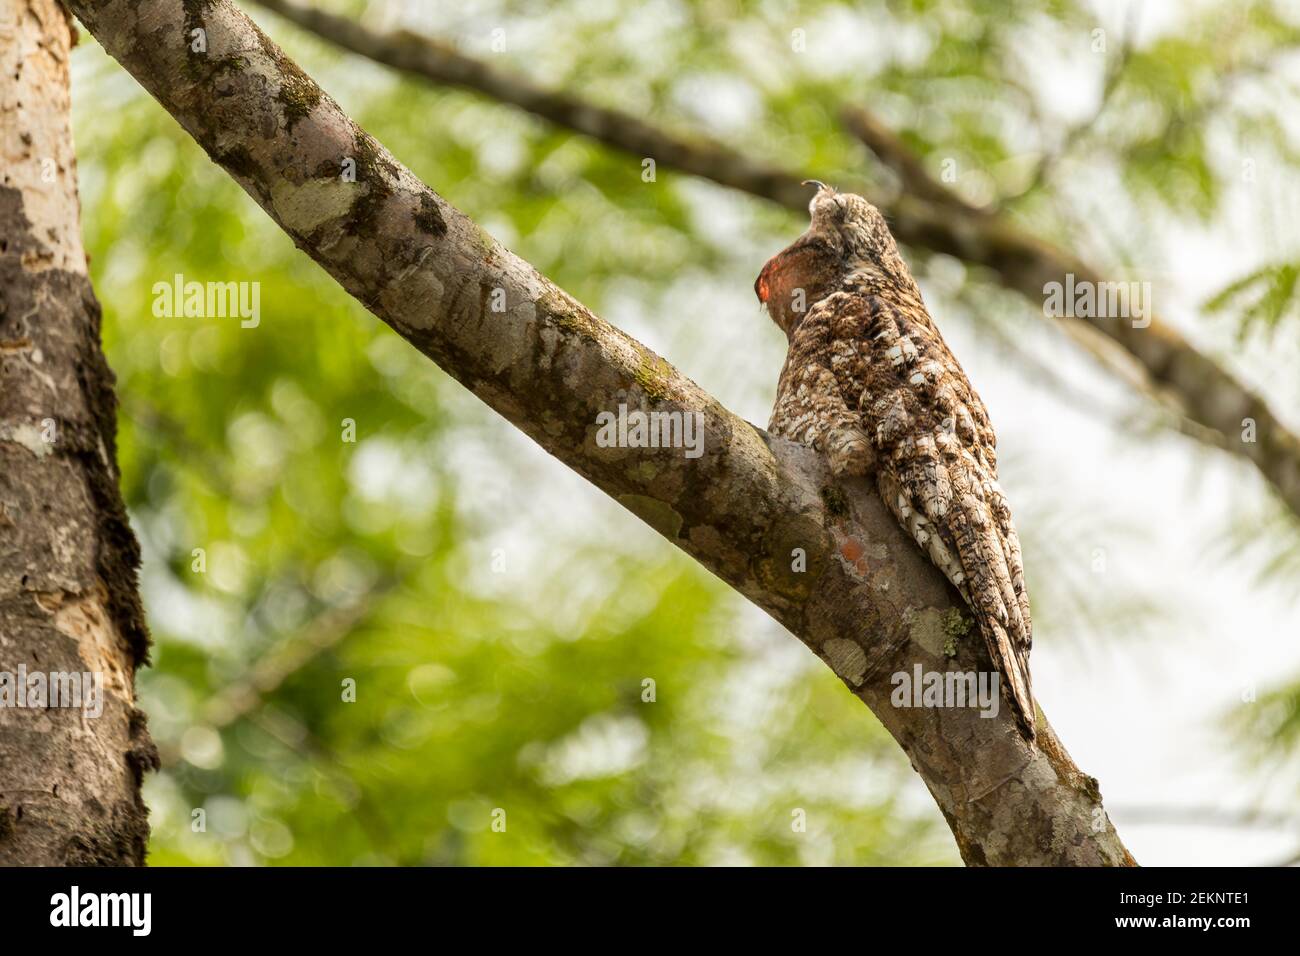 Potoo (Nyctibius Grandis) bird camouflaged on a tree branch with brown and white feathers yawning in the rainforest Stock Photo